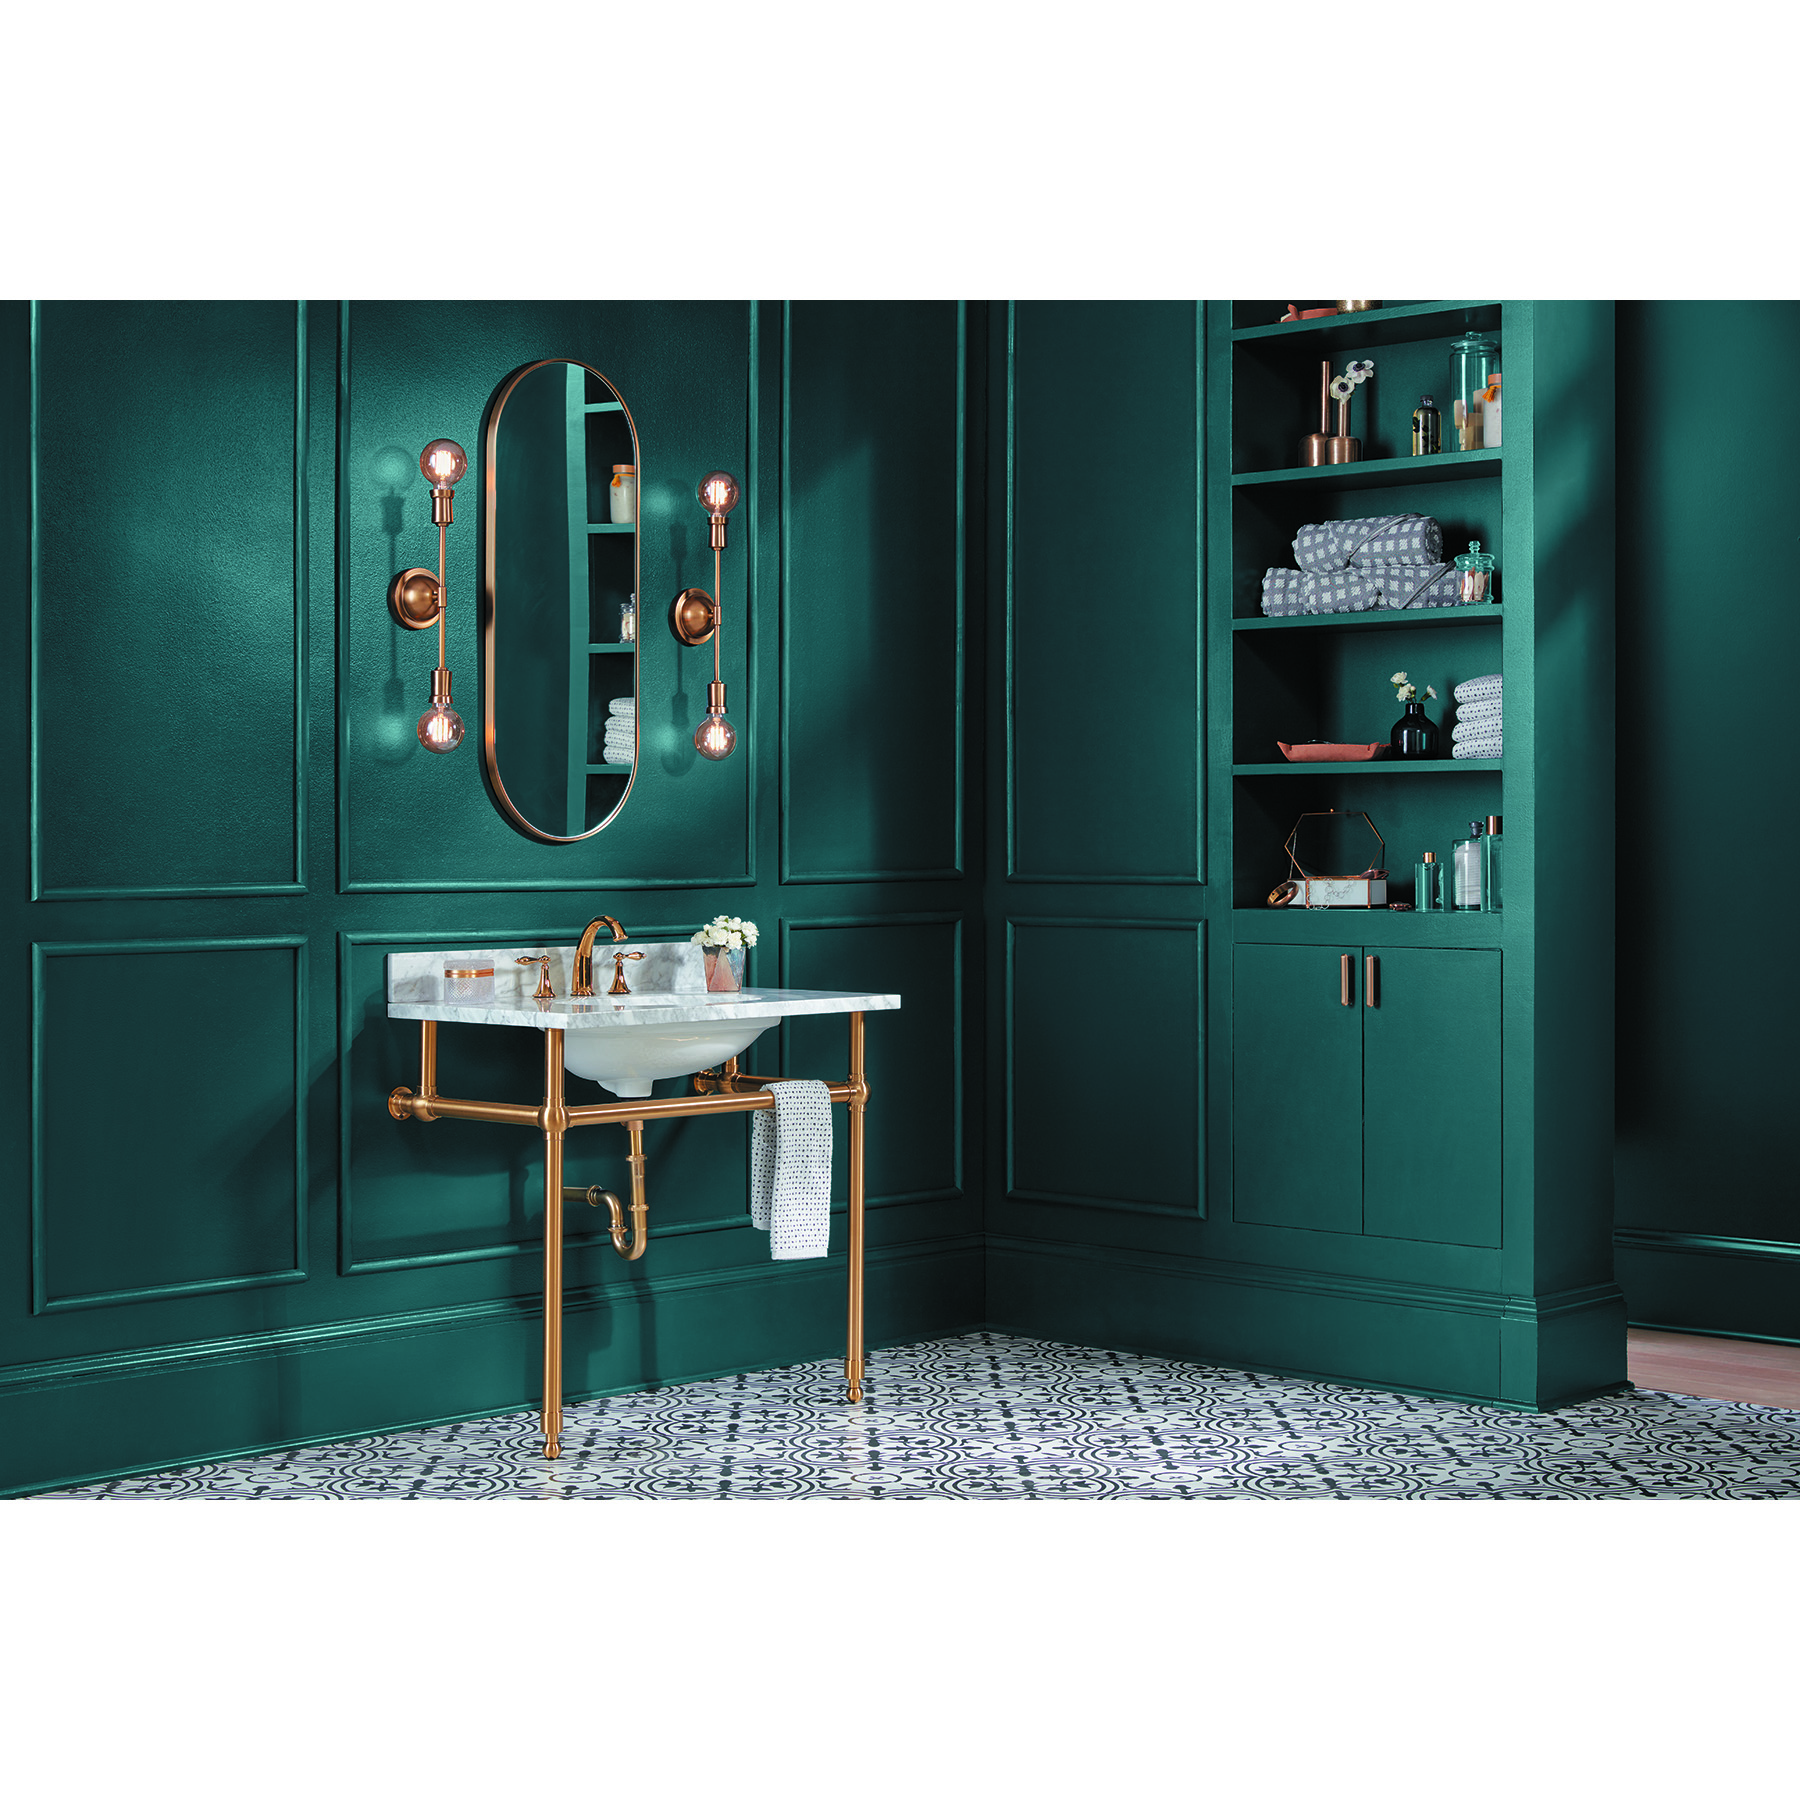 Valspar launches 2023 Color of the Year picks with a palette of 12 shades